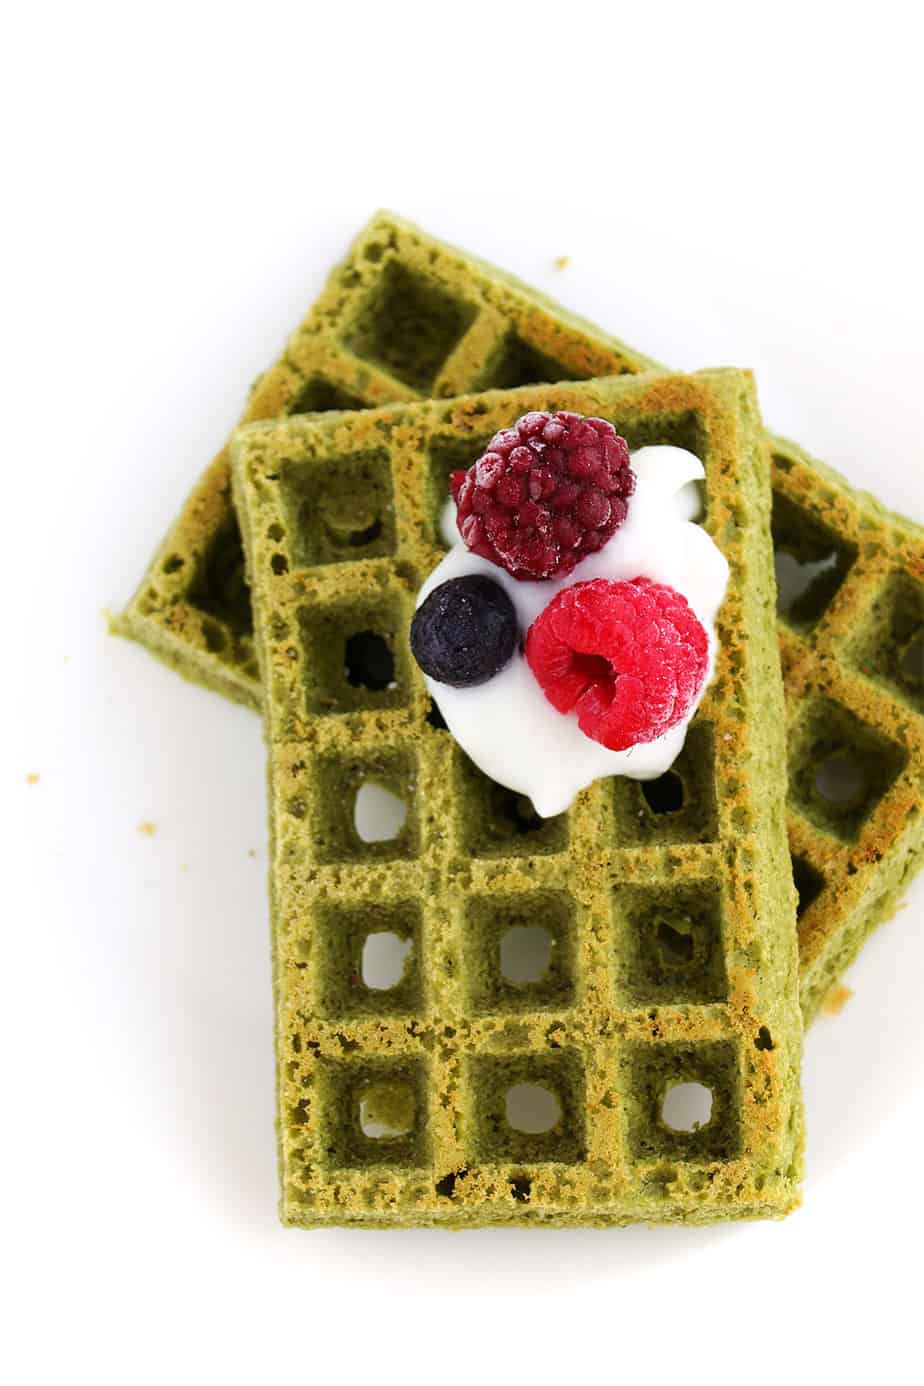 Matcha Gluten Free Waffles - A easy to make breakfast option with the delicious and healthy flavours of matcha.